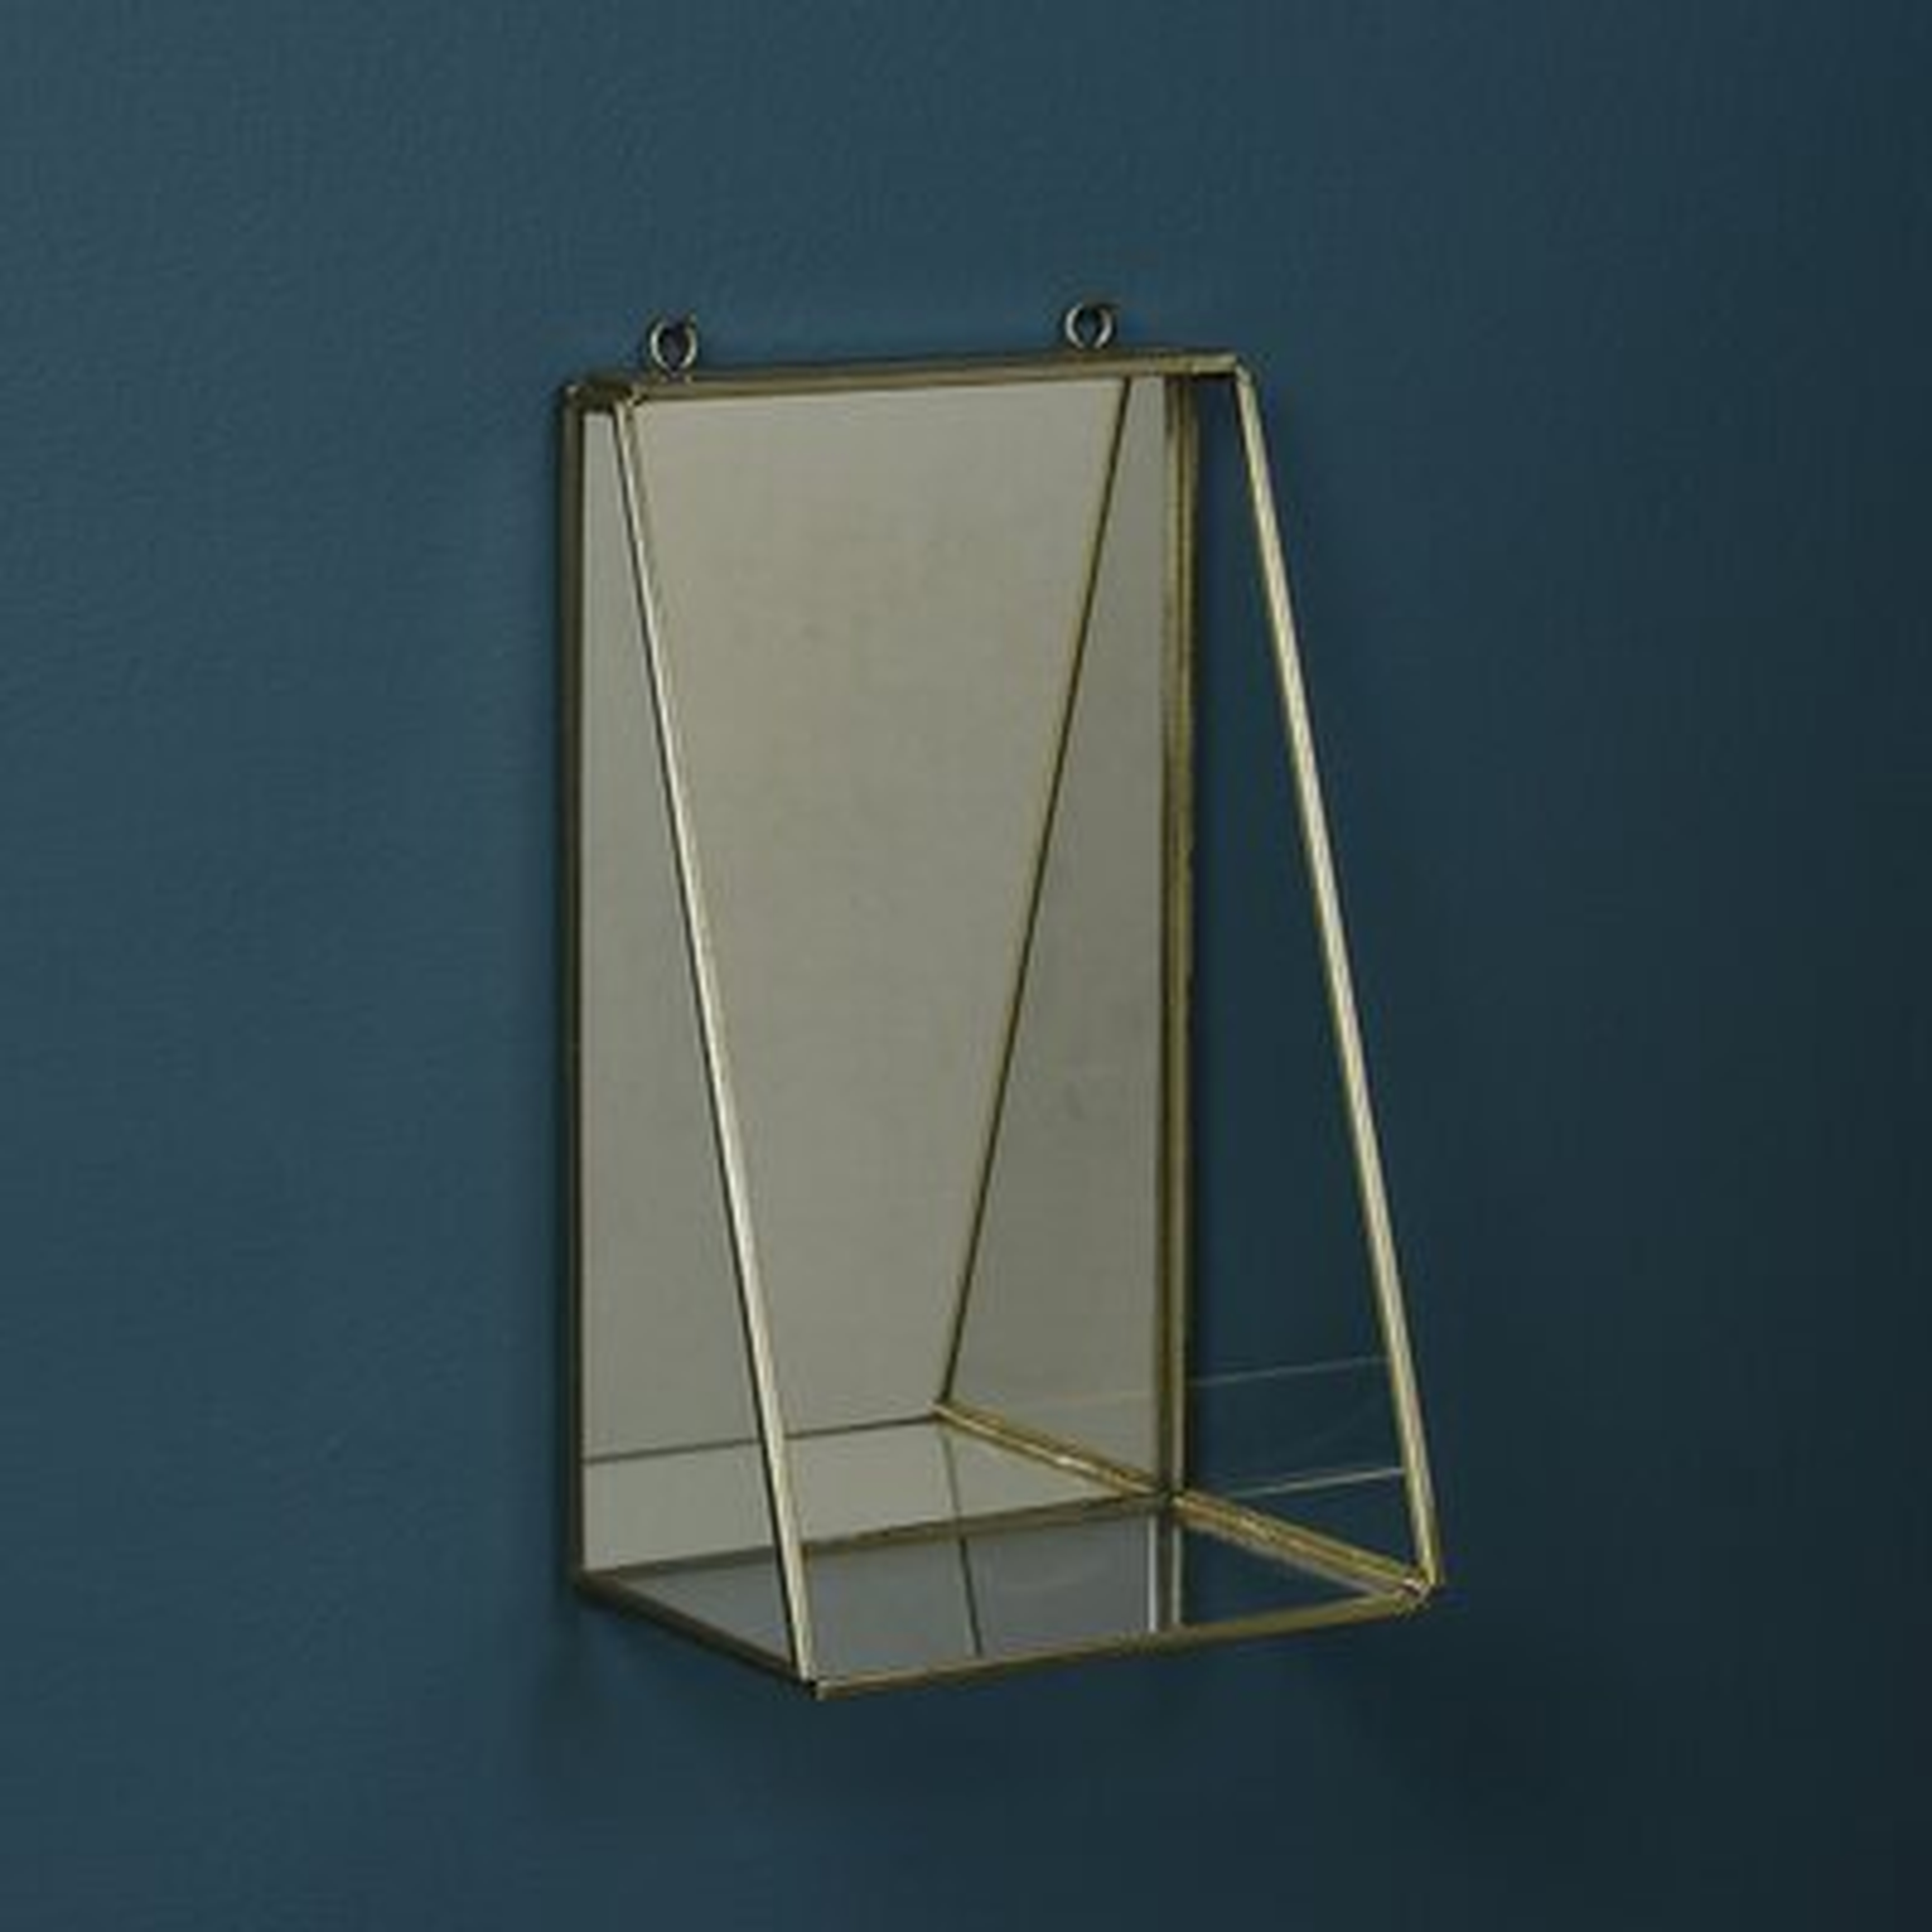 Paradis Glam Accent Mirror with Shelves - Wayfair